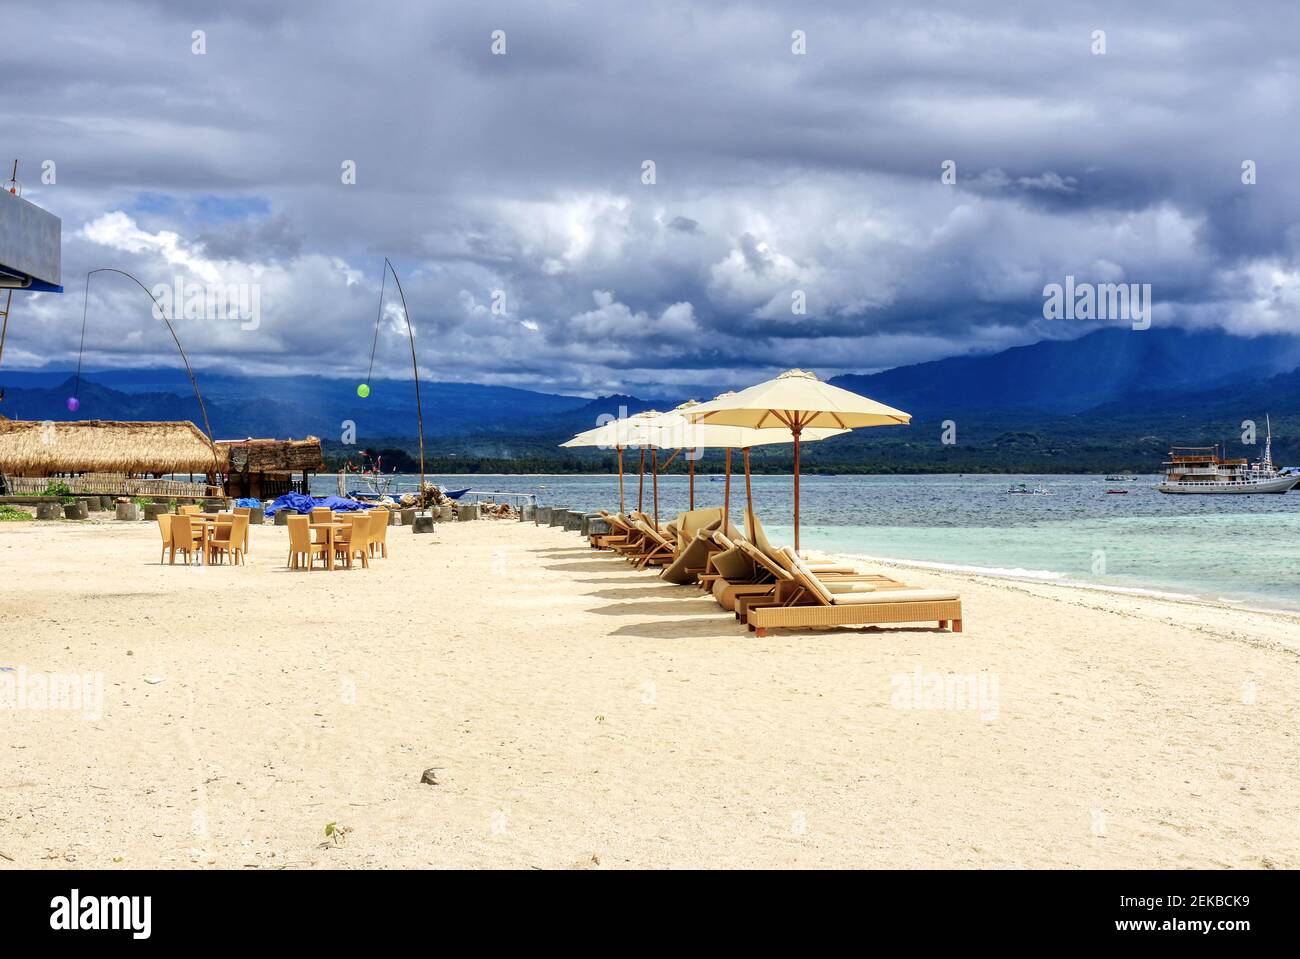 Gili Air Island in the Indian Ocean. 03.01.2017 Beach comfort. Scenery for the beach. Made by hand. Stock Photo